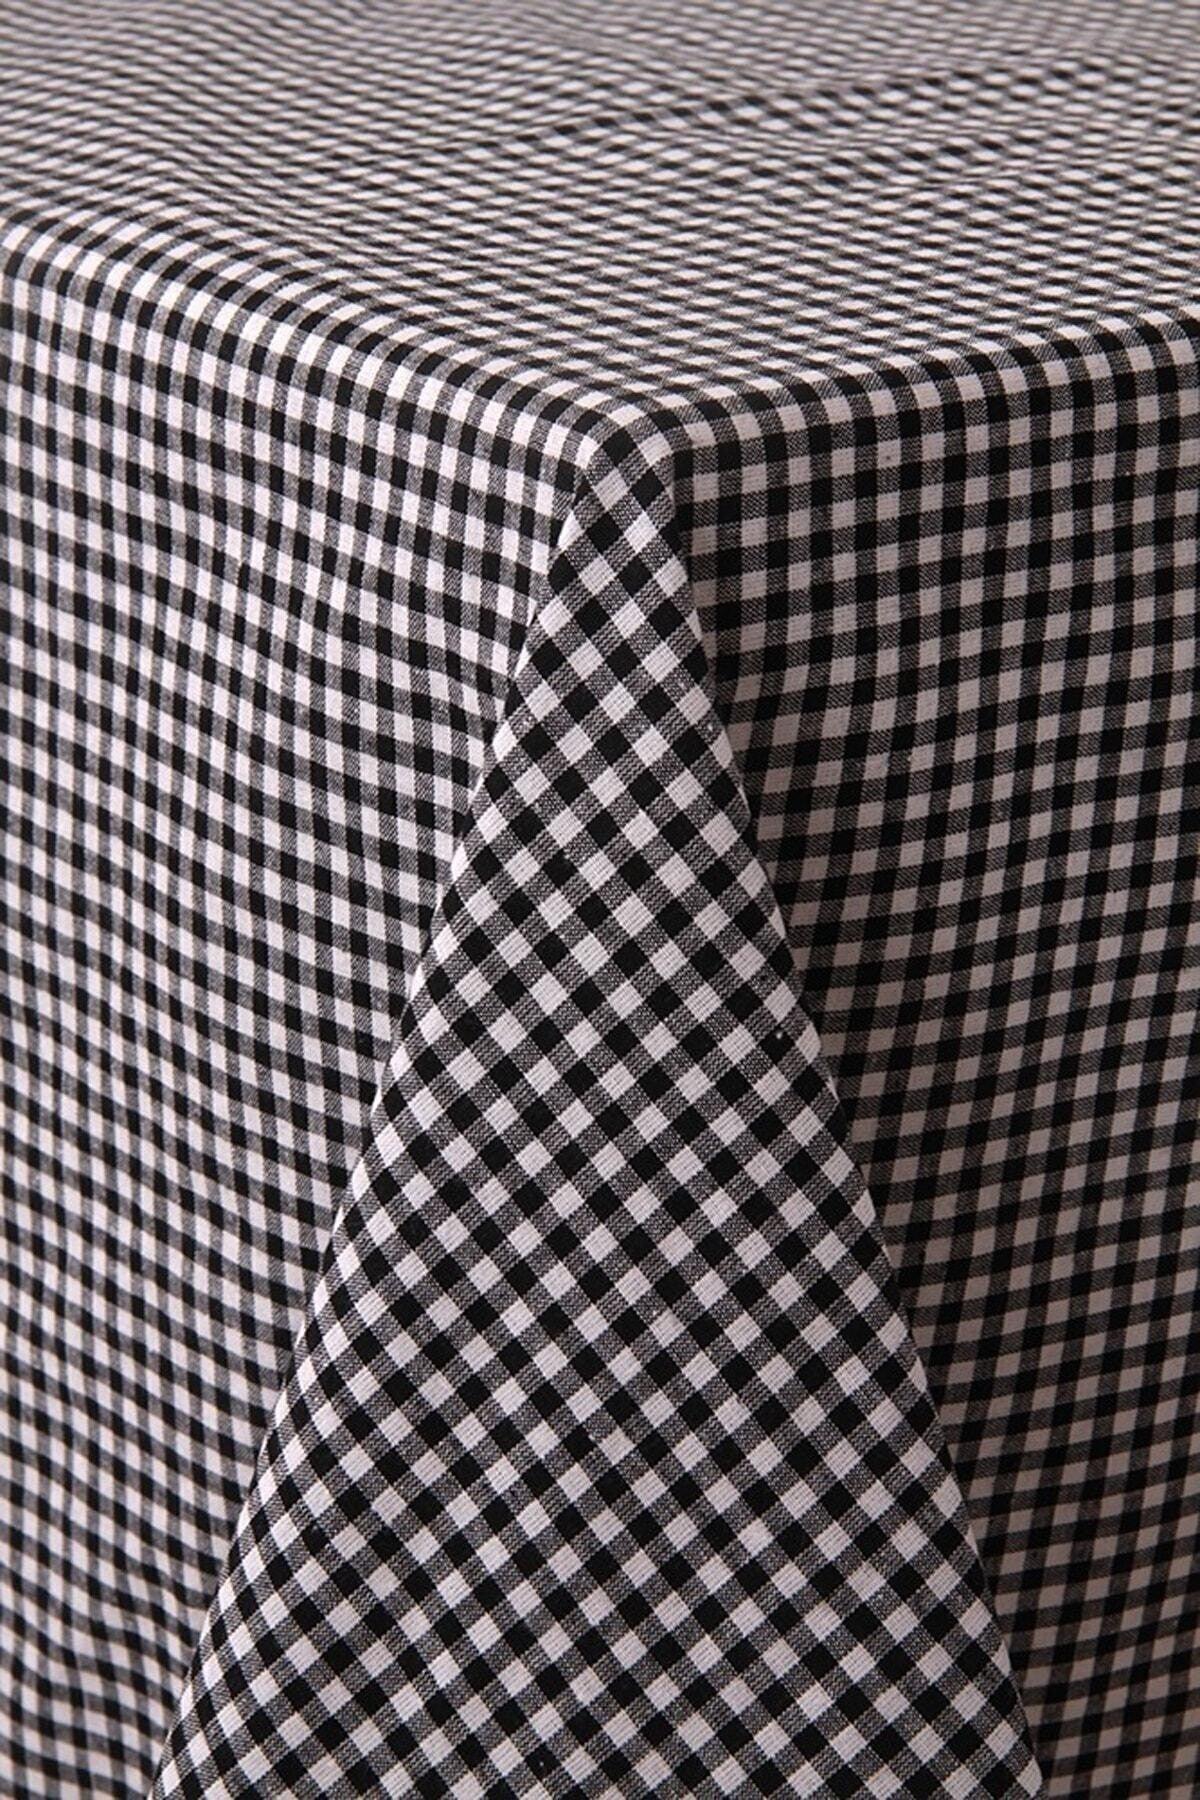 Piti Checkered Black Table Cloth Cotton, Authentic Table Cover, Picnic Cover - Swordslife